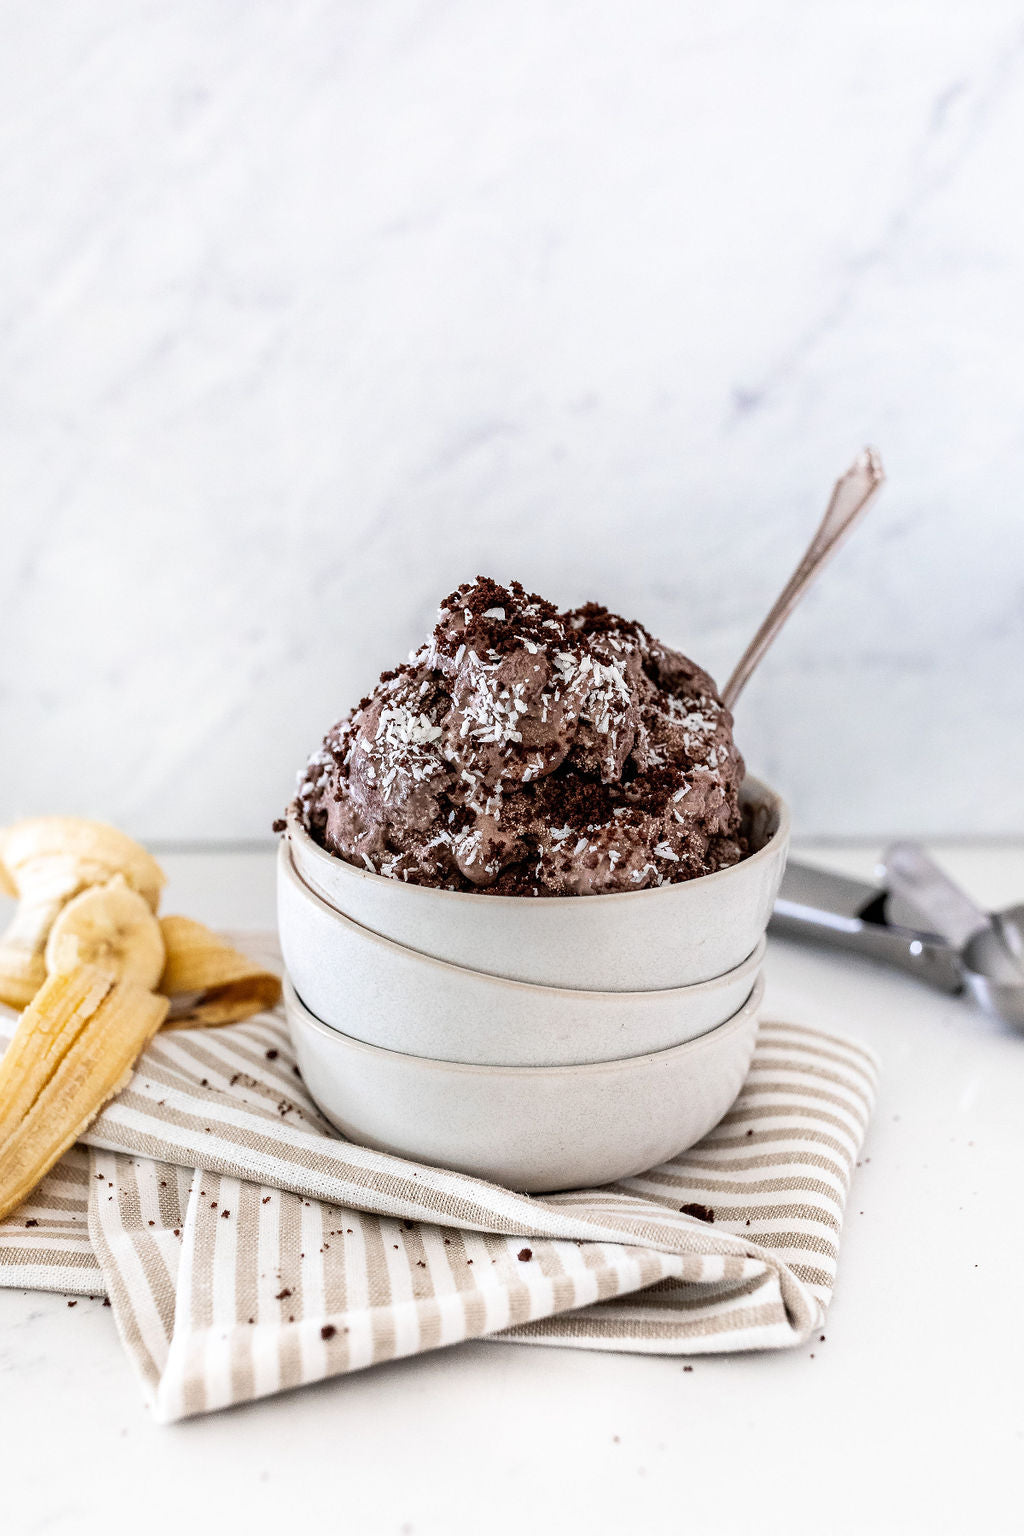 Chocolate ice cream with coconut flake sprinkles